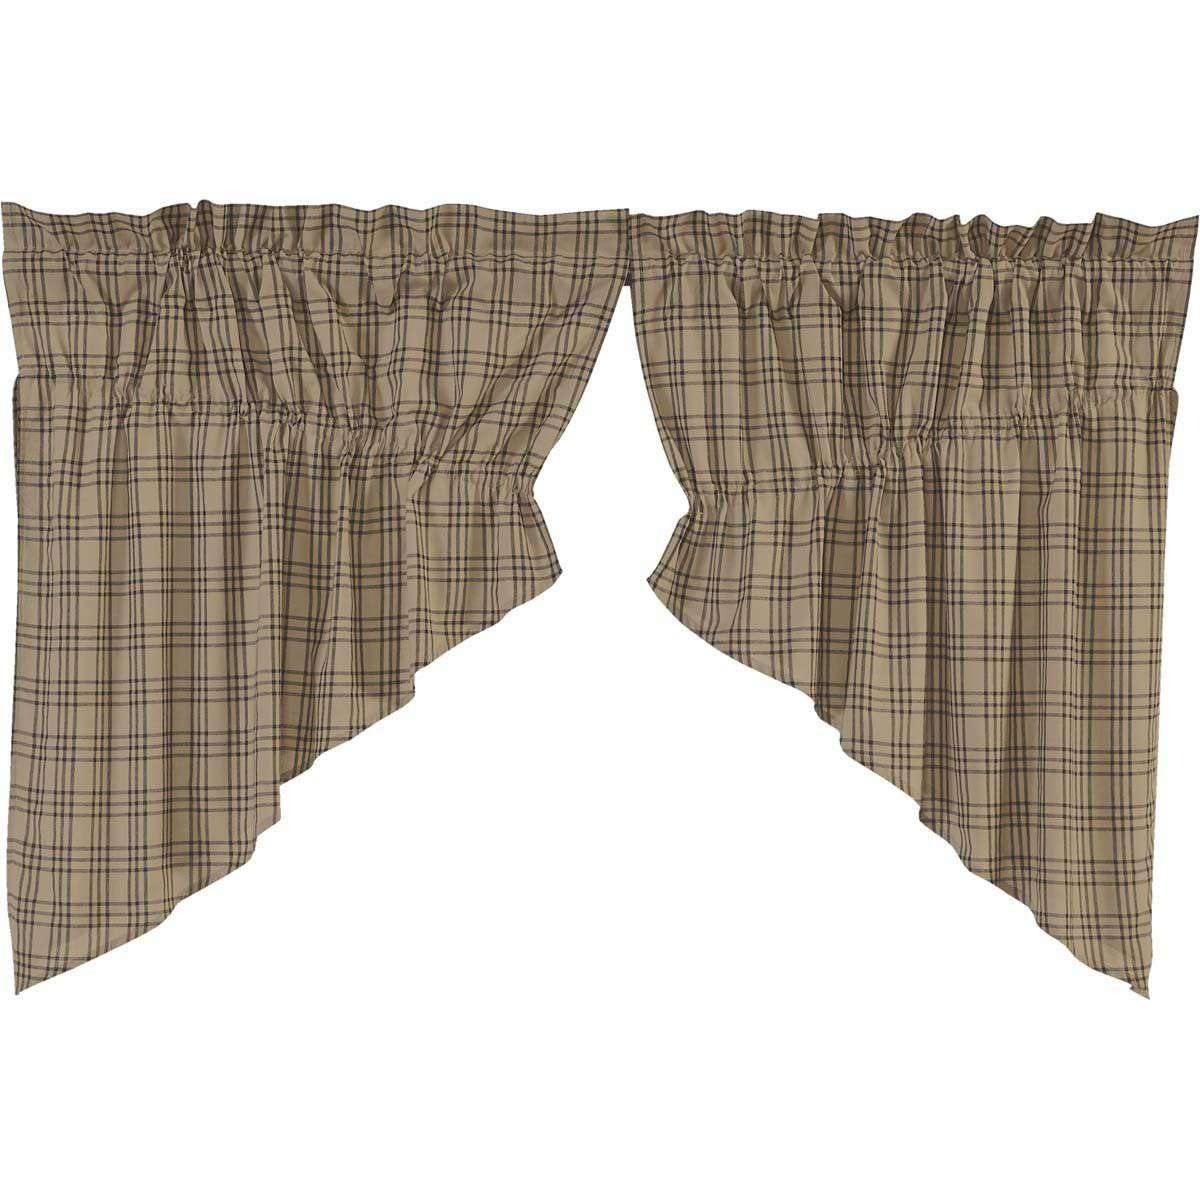 Sawyer Mill Charcoal Plaid Prairie Swag Curtain Set of 2 36x36x18 VHC Brands online